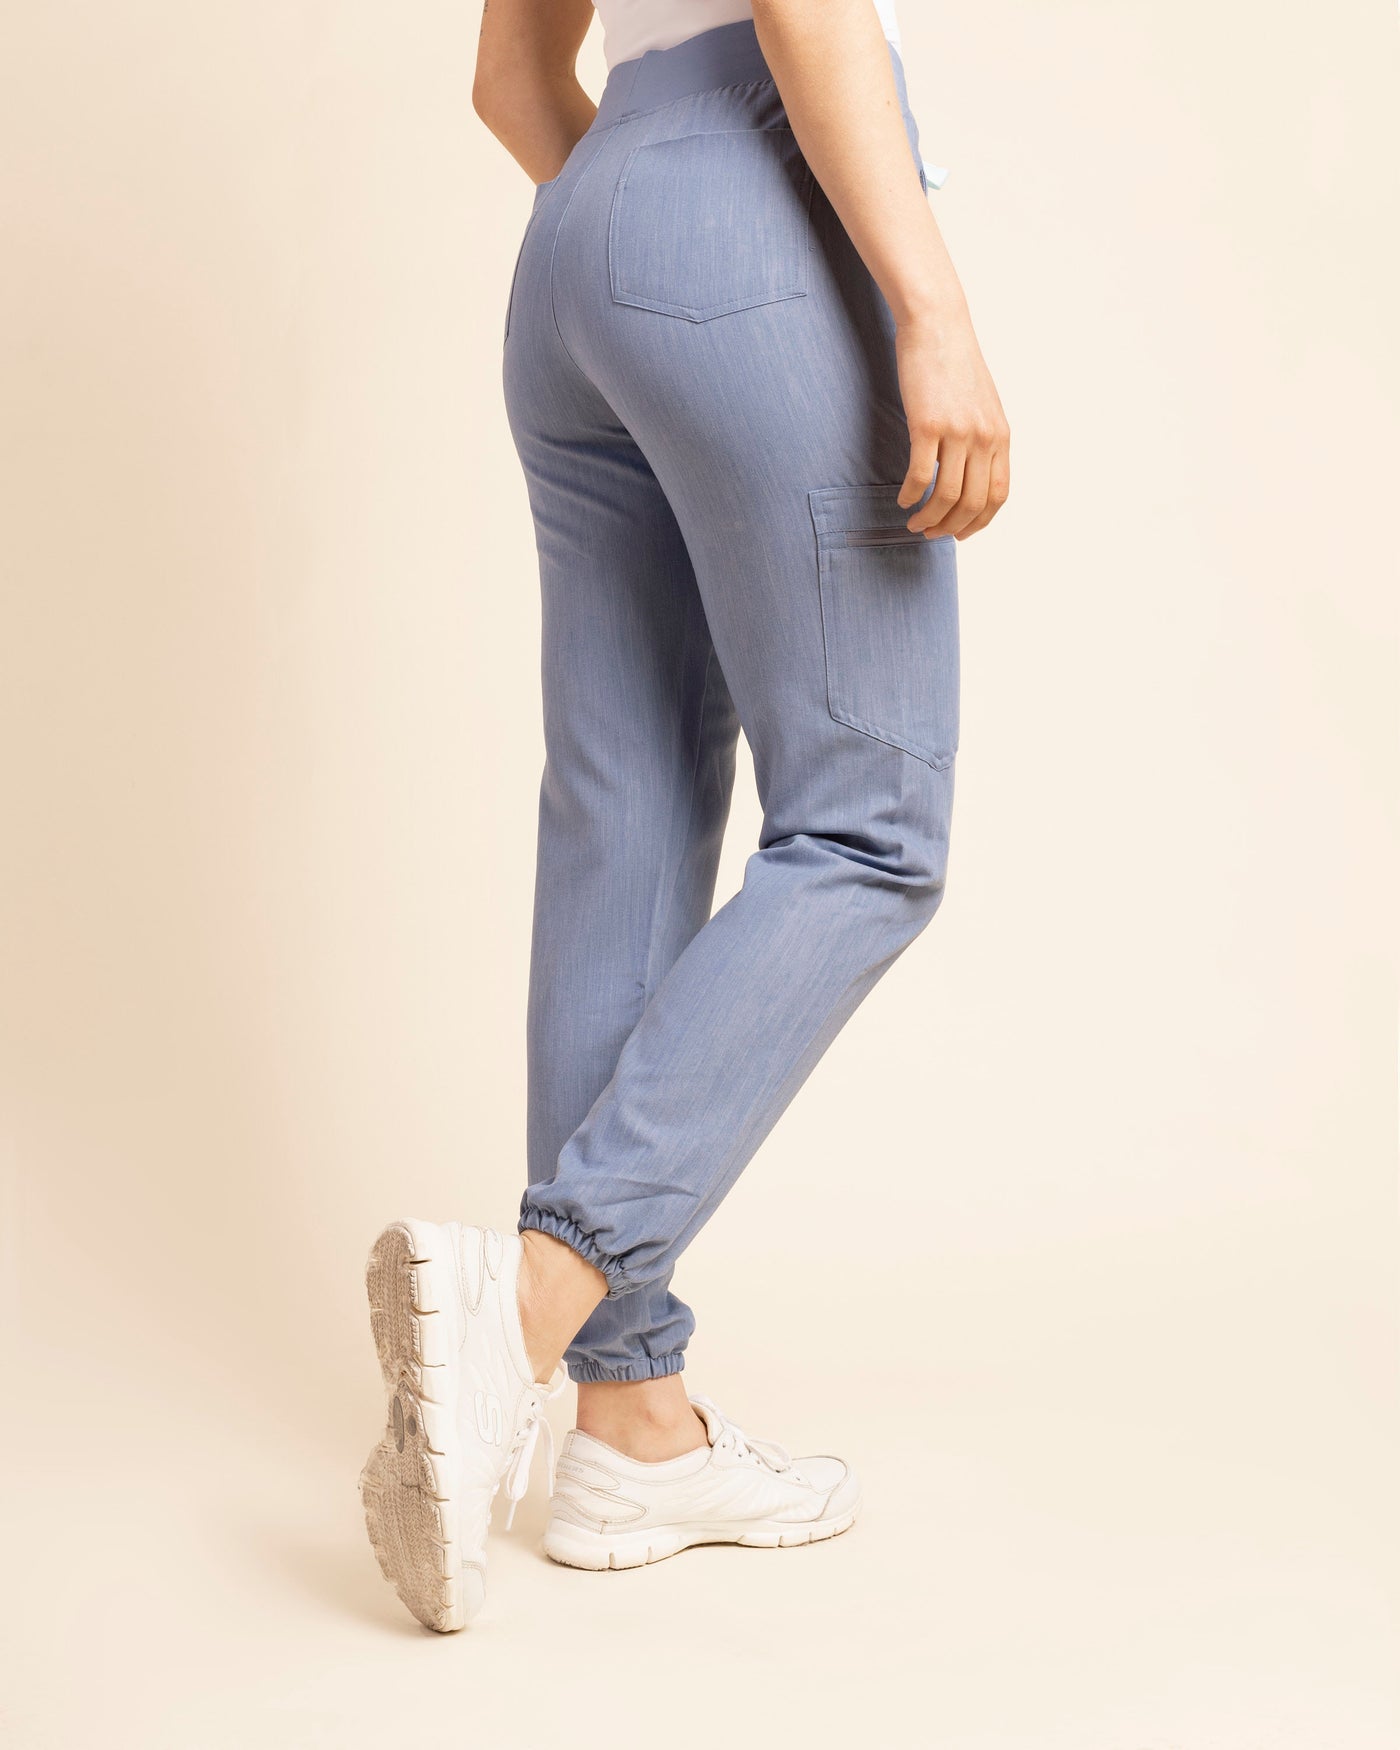 JOGGER MUJER ACTIVE SKY BLUE